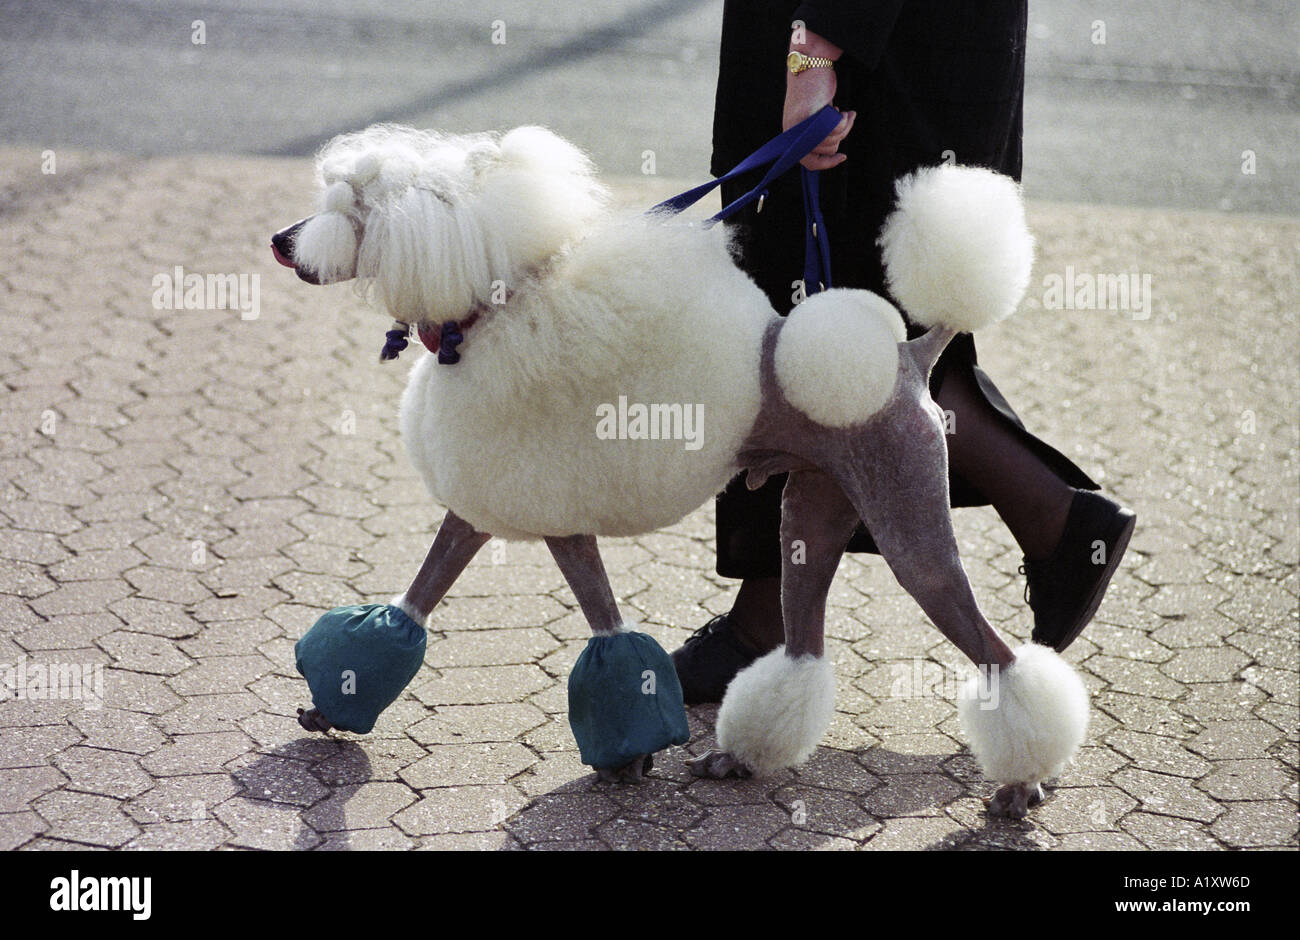 A poodle on the way to Crufts international dog show at the National Exhibition Centre Birmingham UK Stock Photo